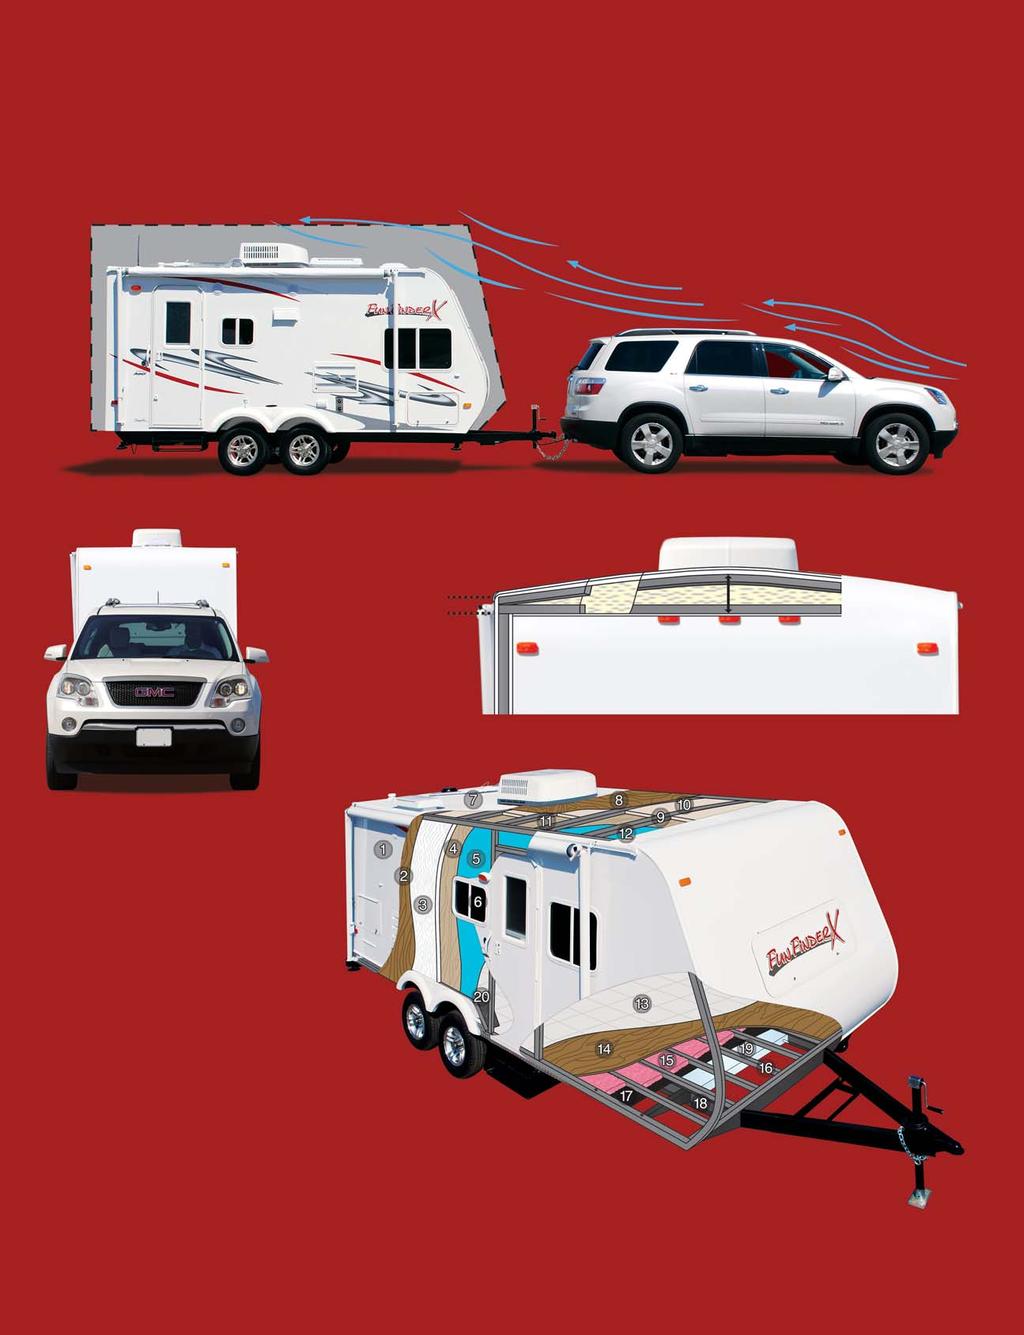 Construction/Aerodynamic Features The Fun FinderX Advantage Cruiser RV has designed our lightweight travel trailers to be towable by today s lighter weight trucks and SUVs.